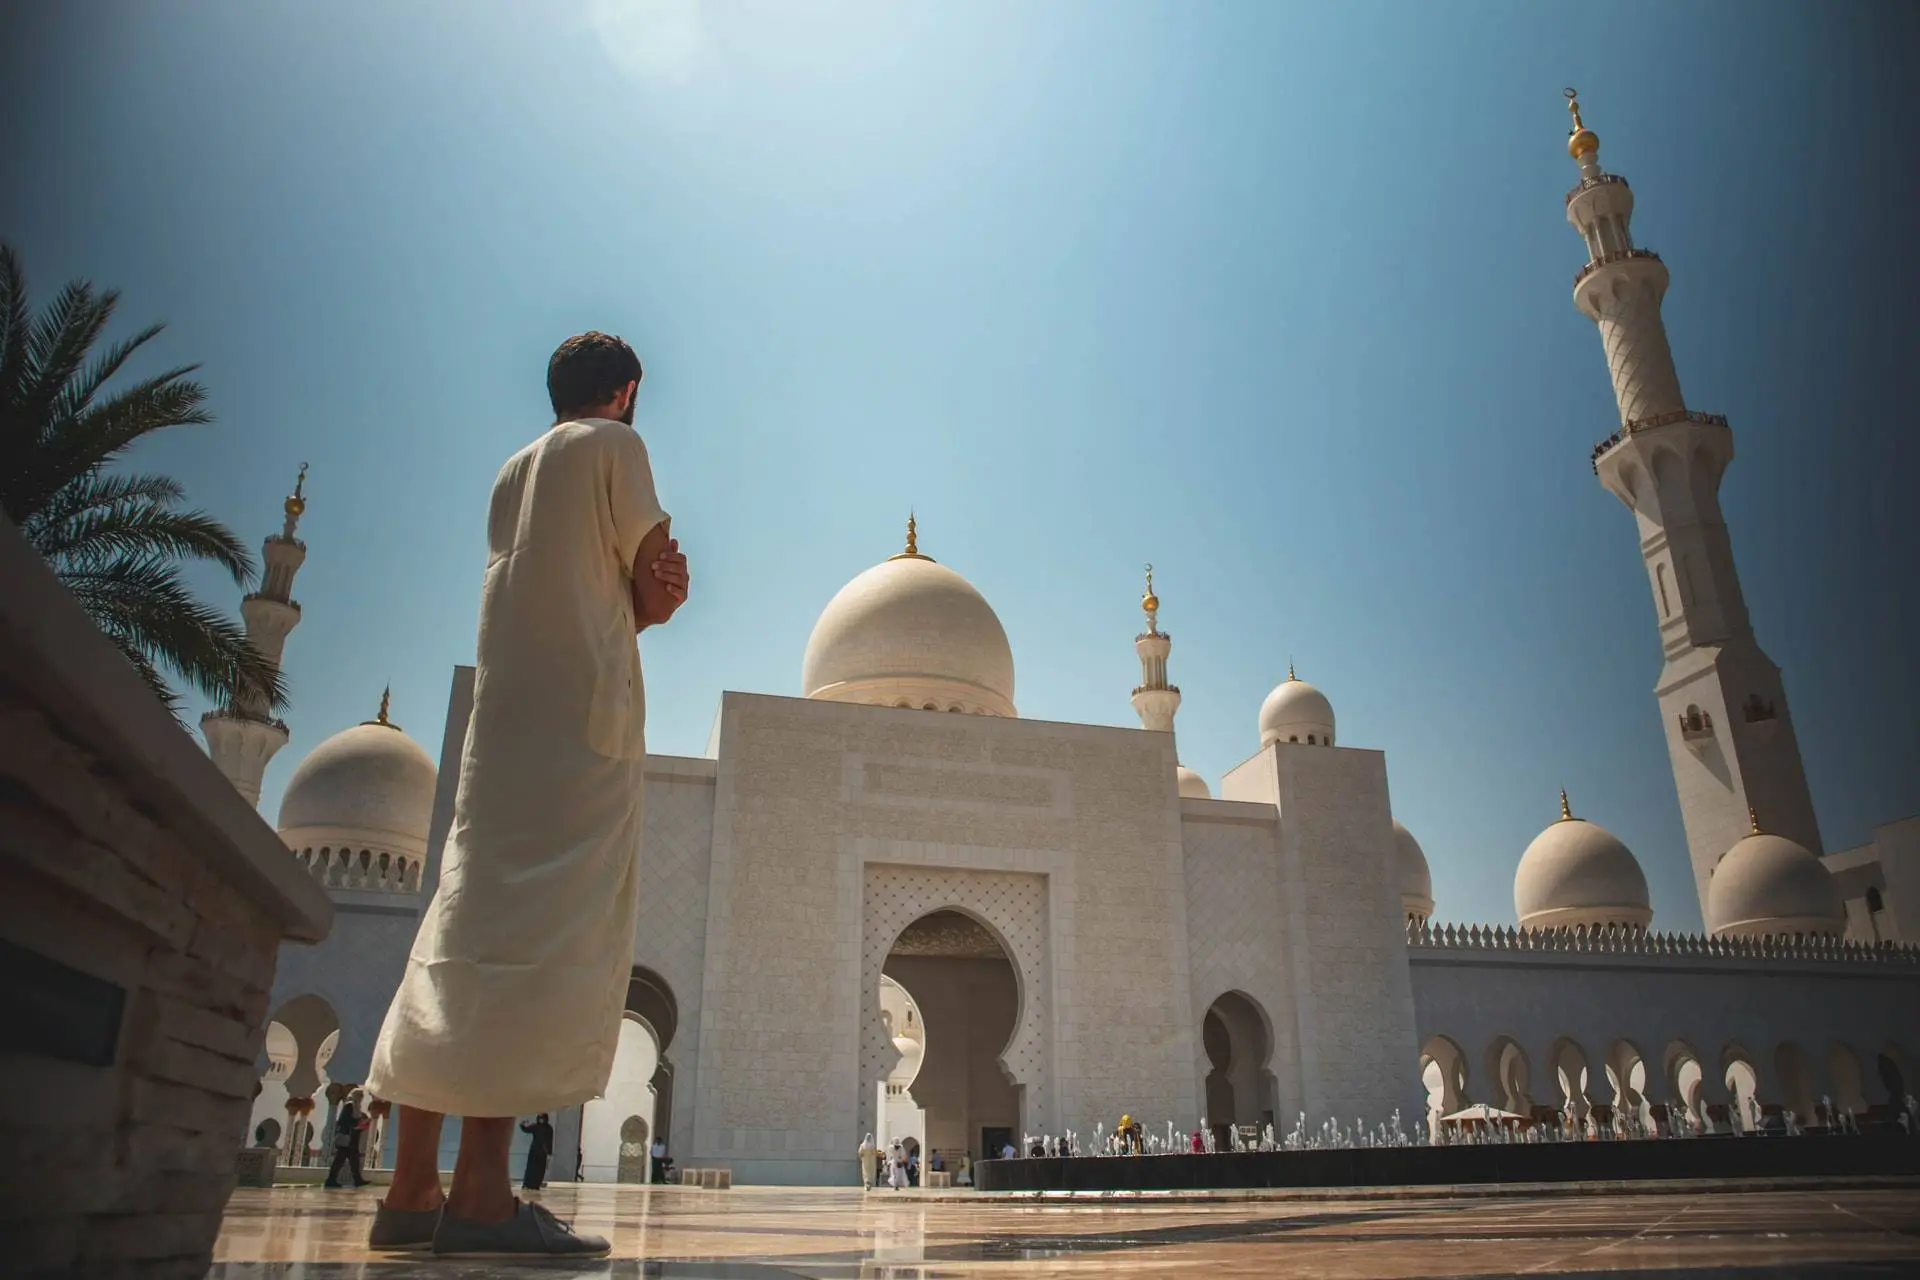 Trip During Ramadan: How to Travel in Muslim Countries